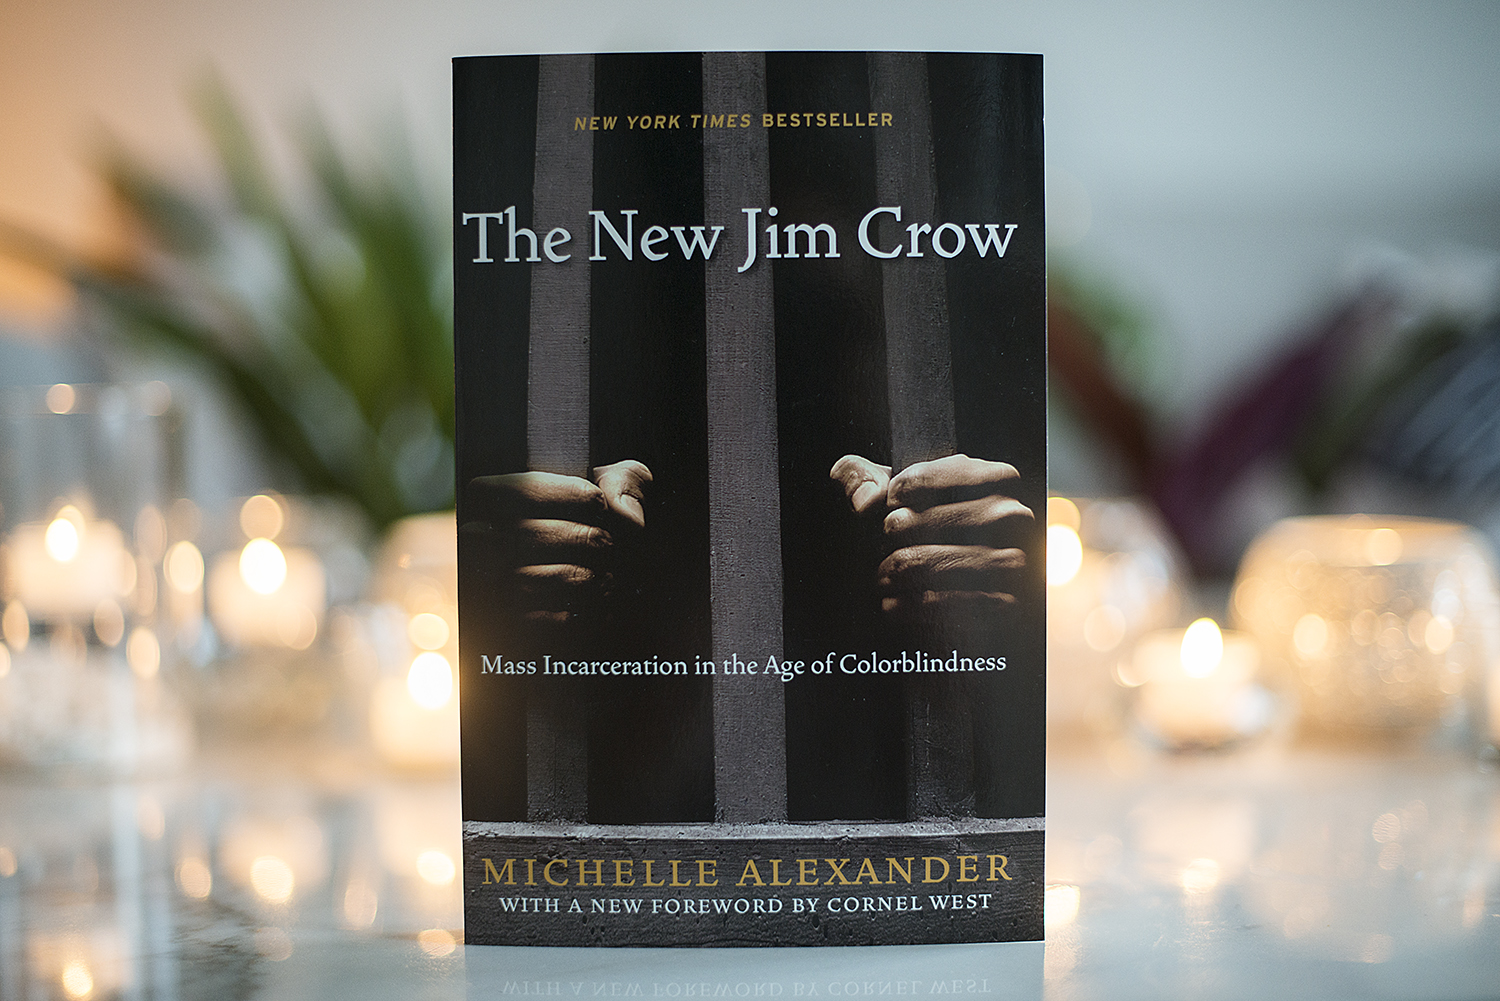 BOOK REVIEW: THE NEW JIM CROW BY MICHELLE ALEXANDER | The Book Castle